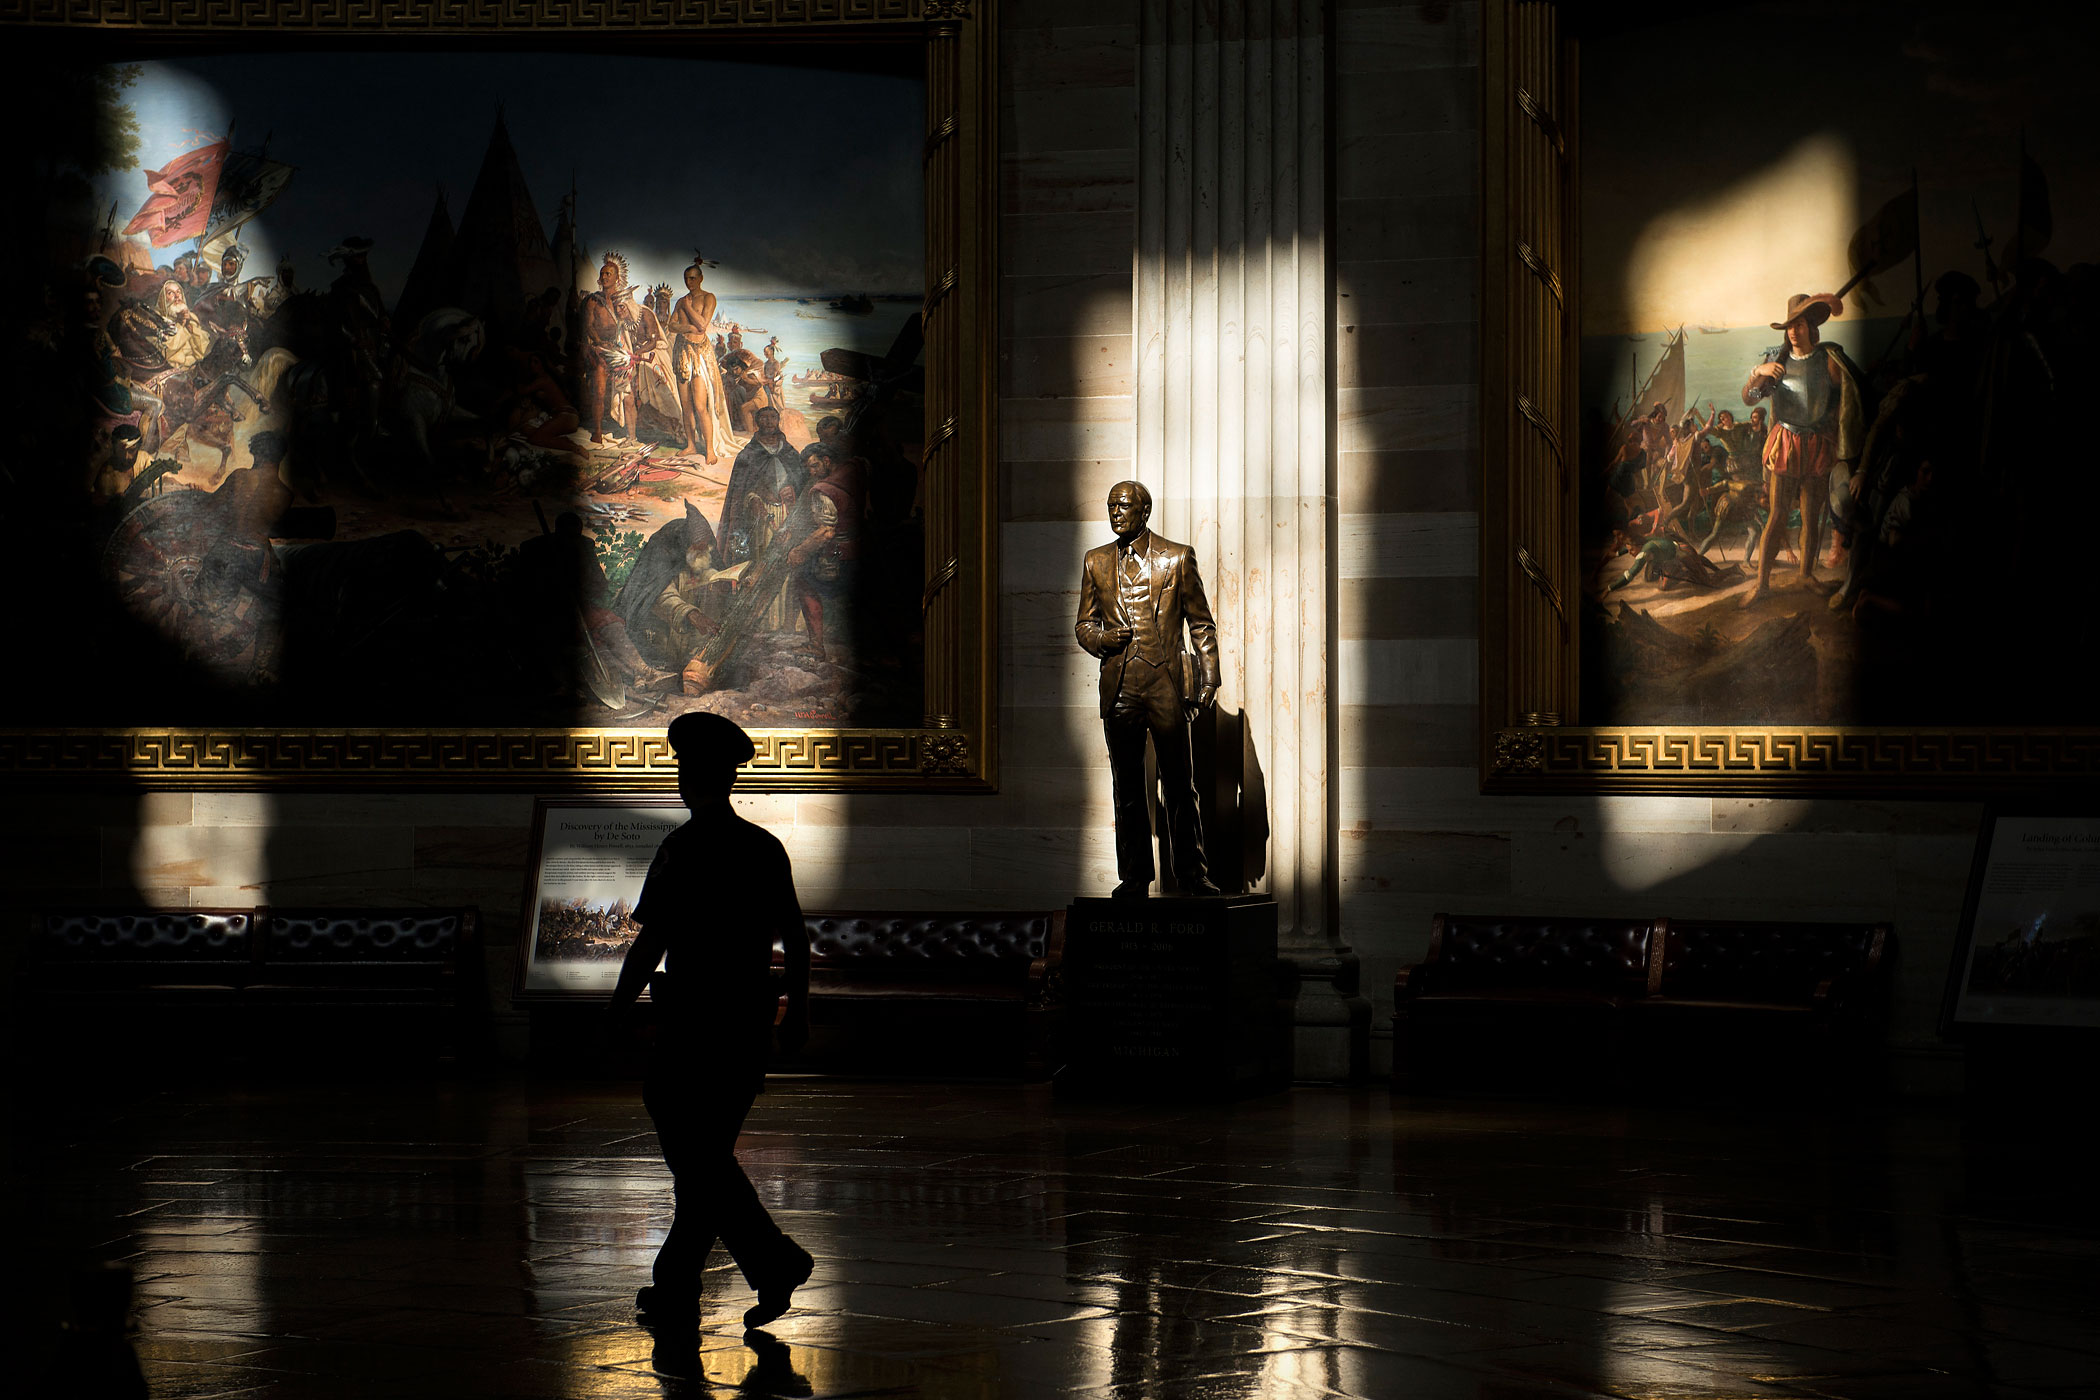 Oct. 1, 2013. A Capitol Police Officer walks past a statue of Gerald Ford, who was president during the 1976 shutdown of the federal government, in the Rotunda while the building was closed to tours on Capitol Hill in Washington.